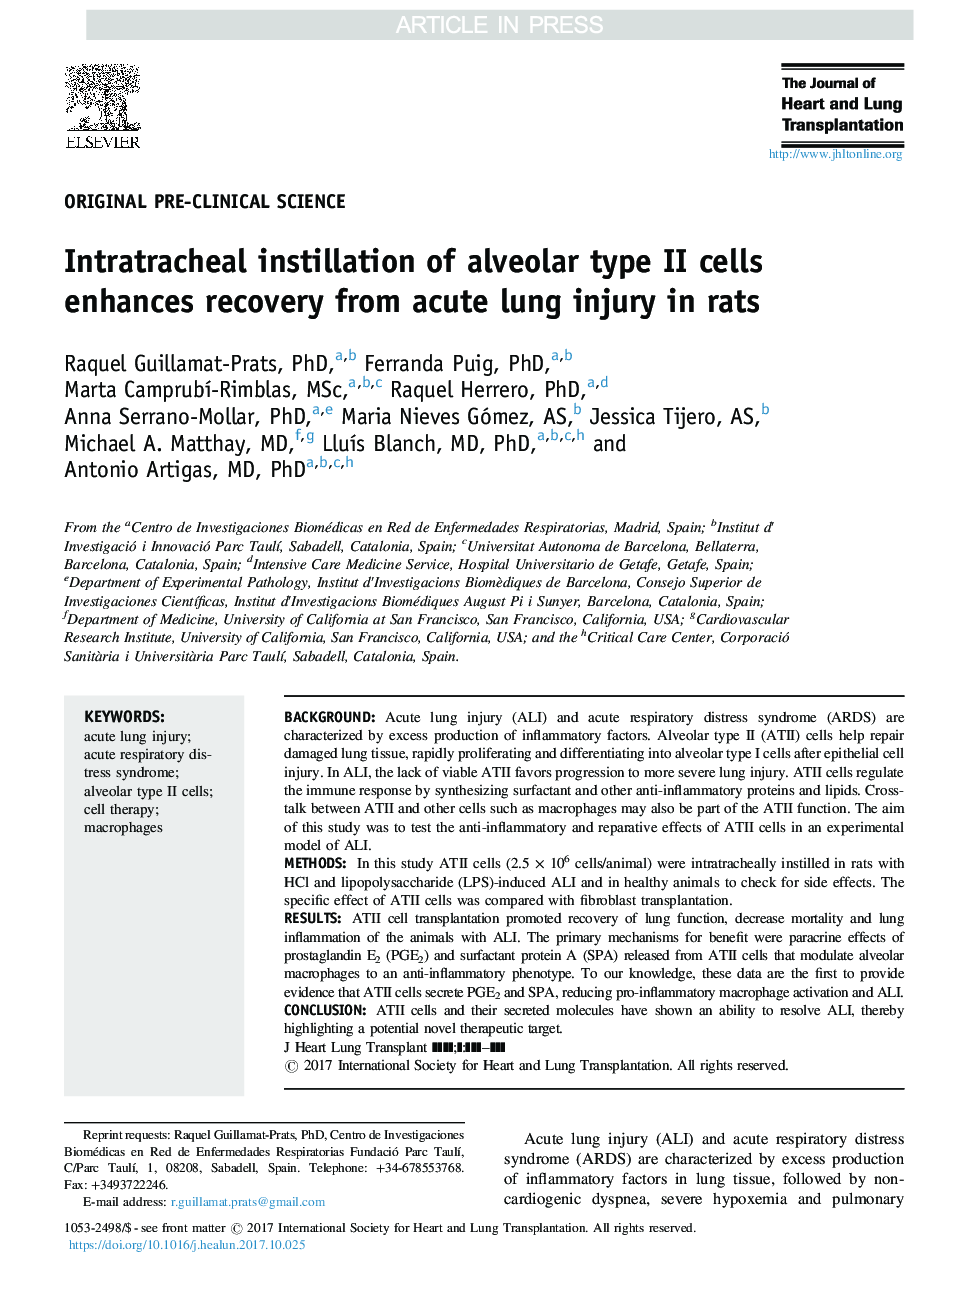 Intratracheal instillation of alveolar type II cells enhances recovery from acute lung injury in rats